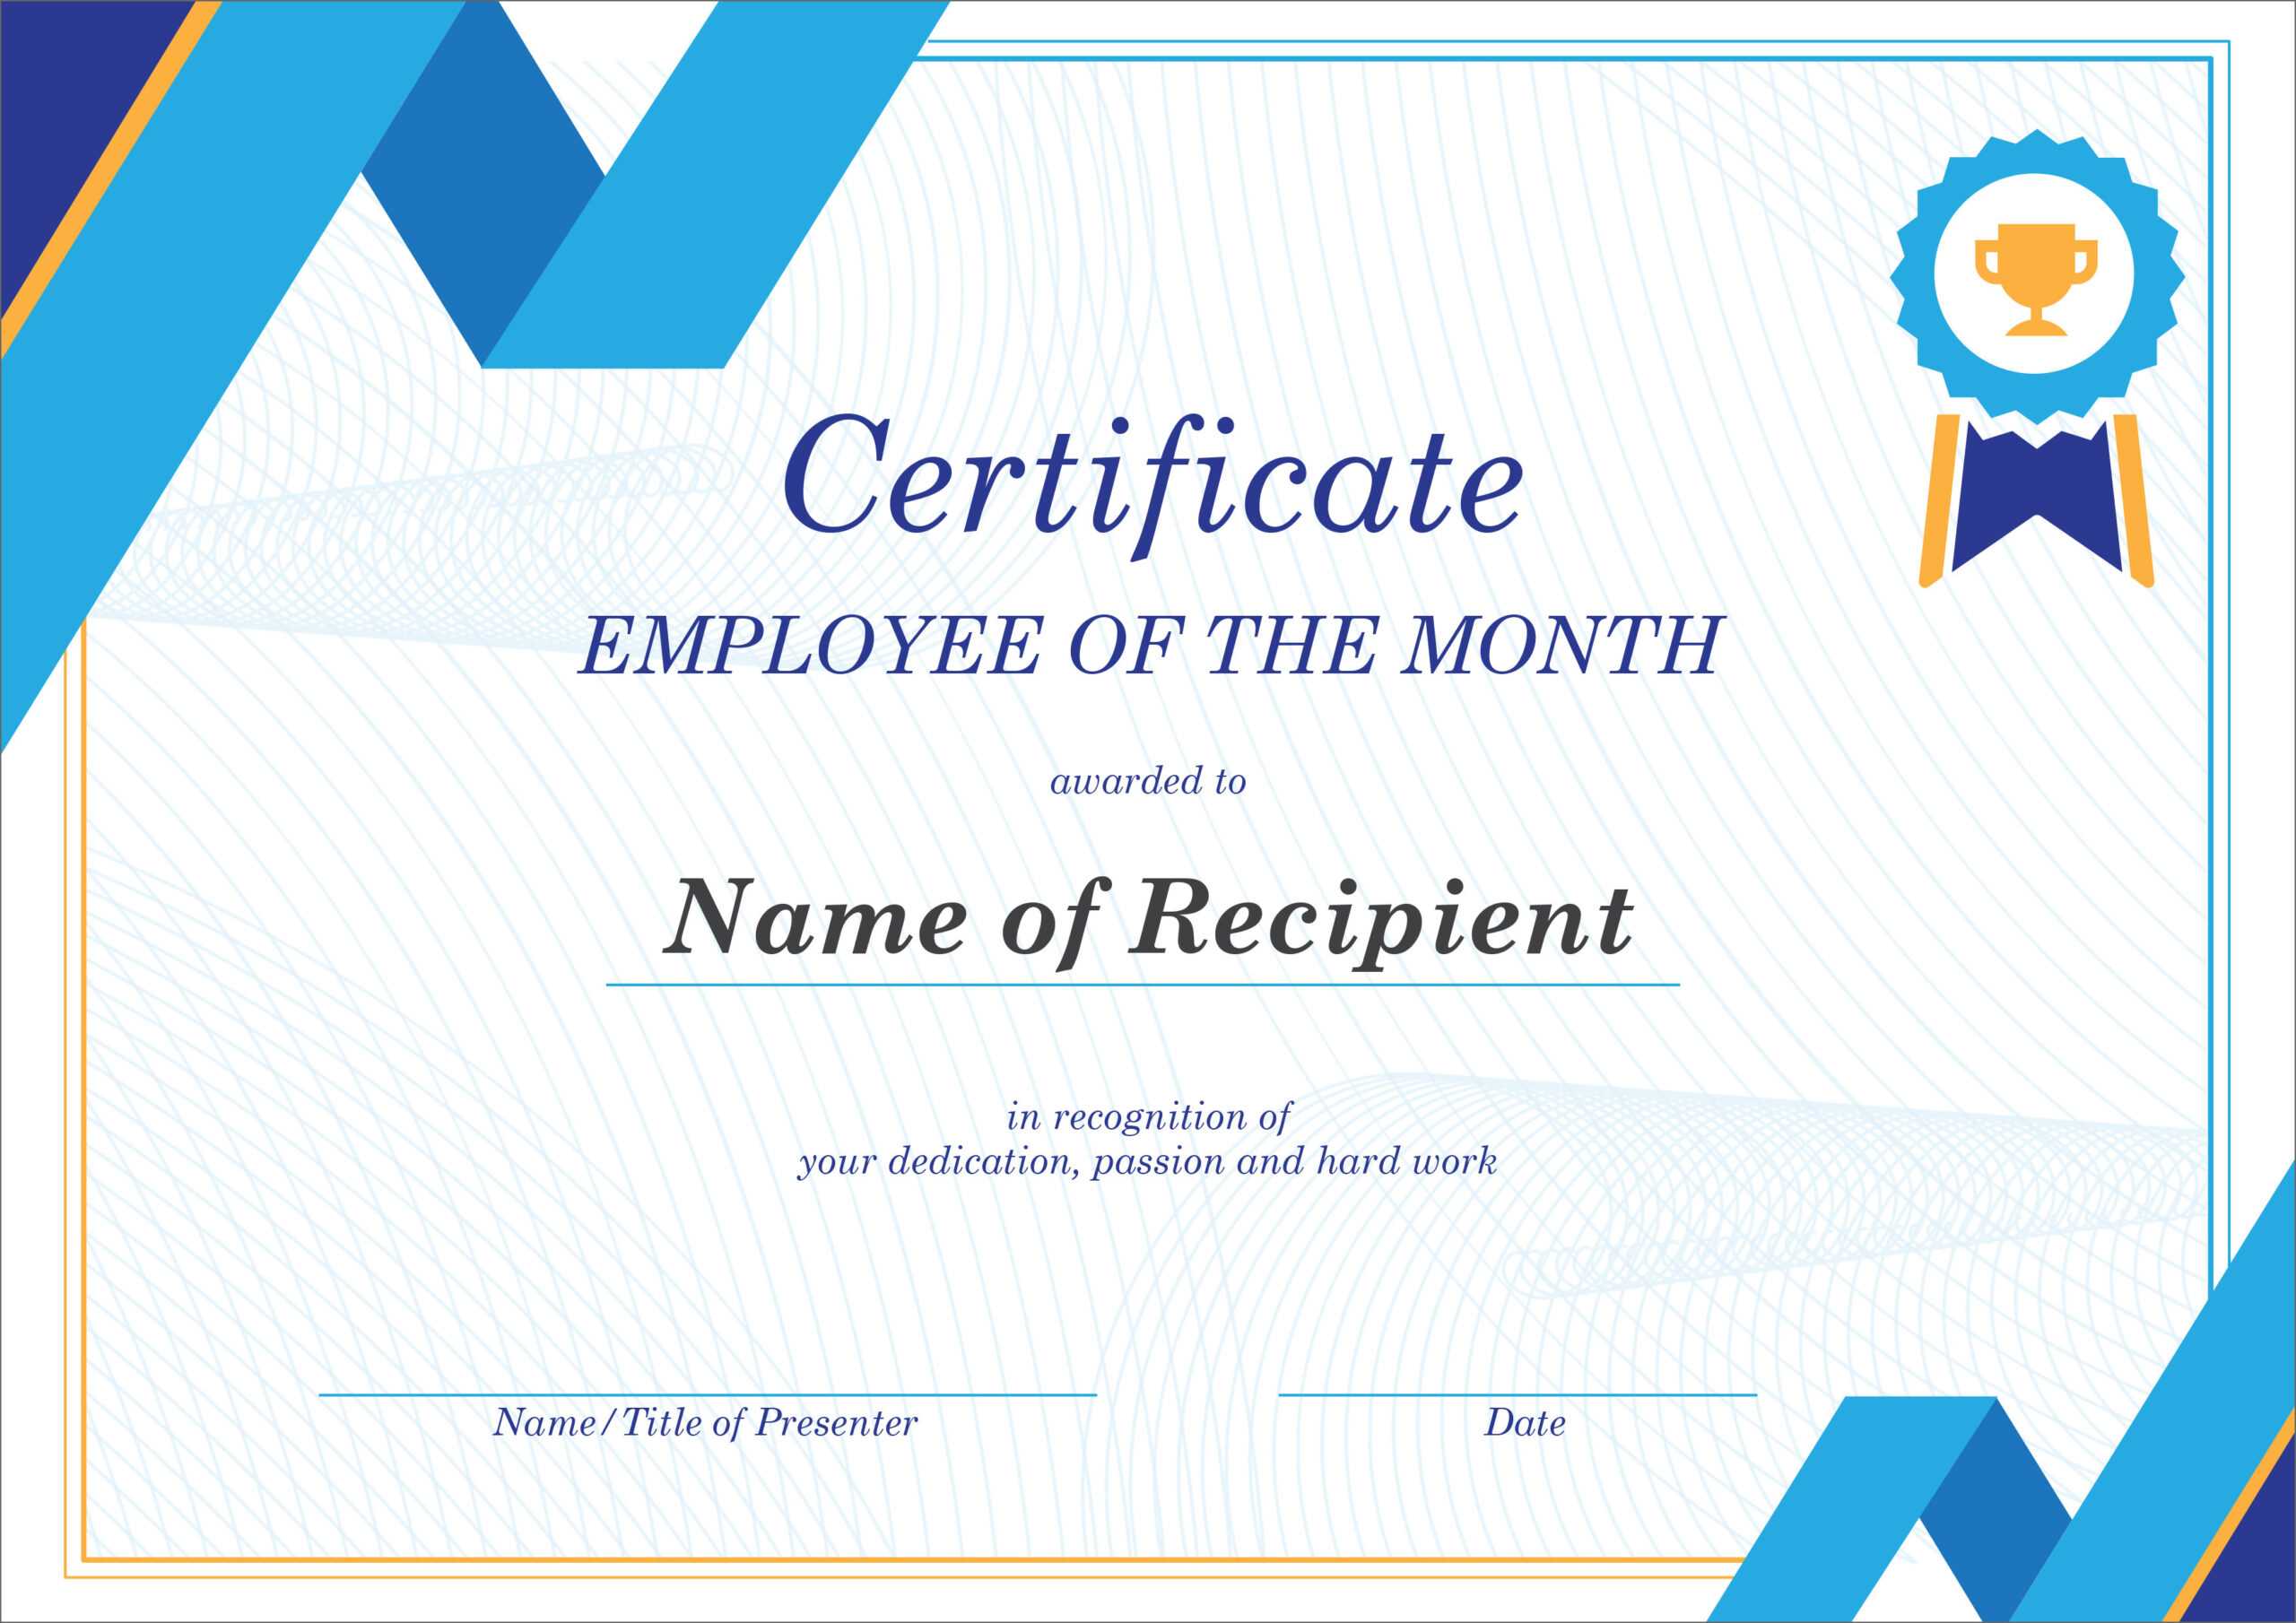 50 Free Creative Blank Certificate Templates In Psd With Employee Recognition Certificates Templates Free